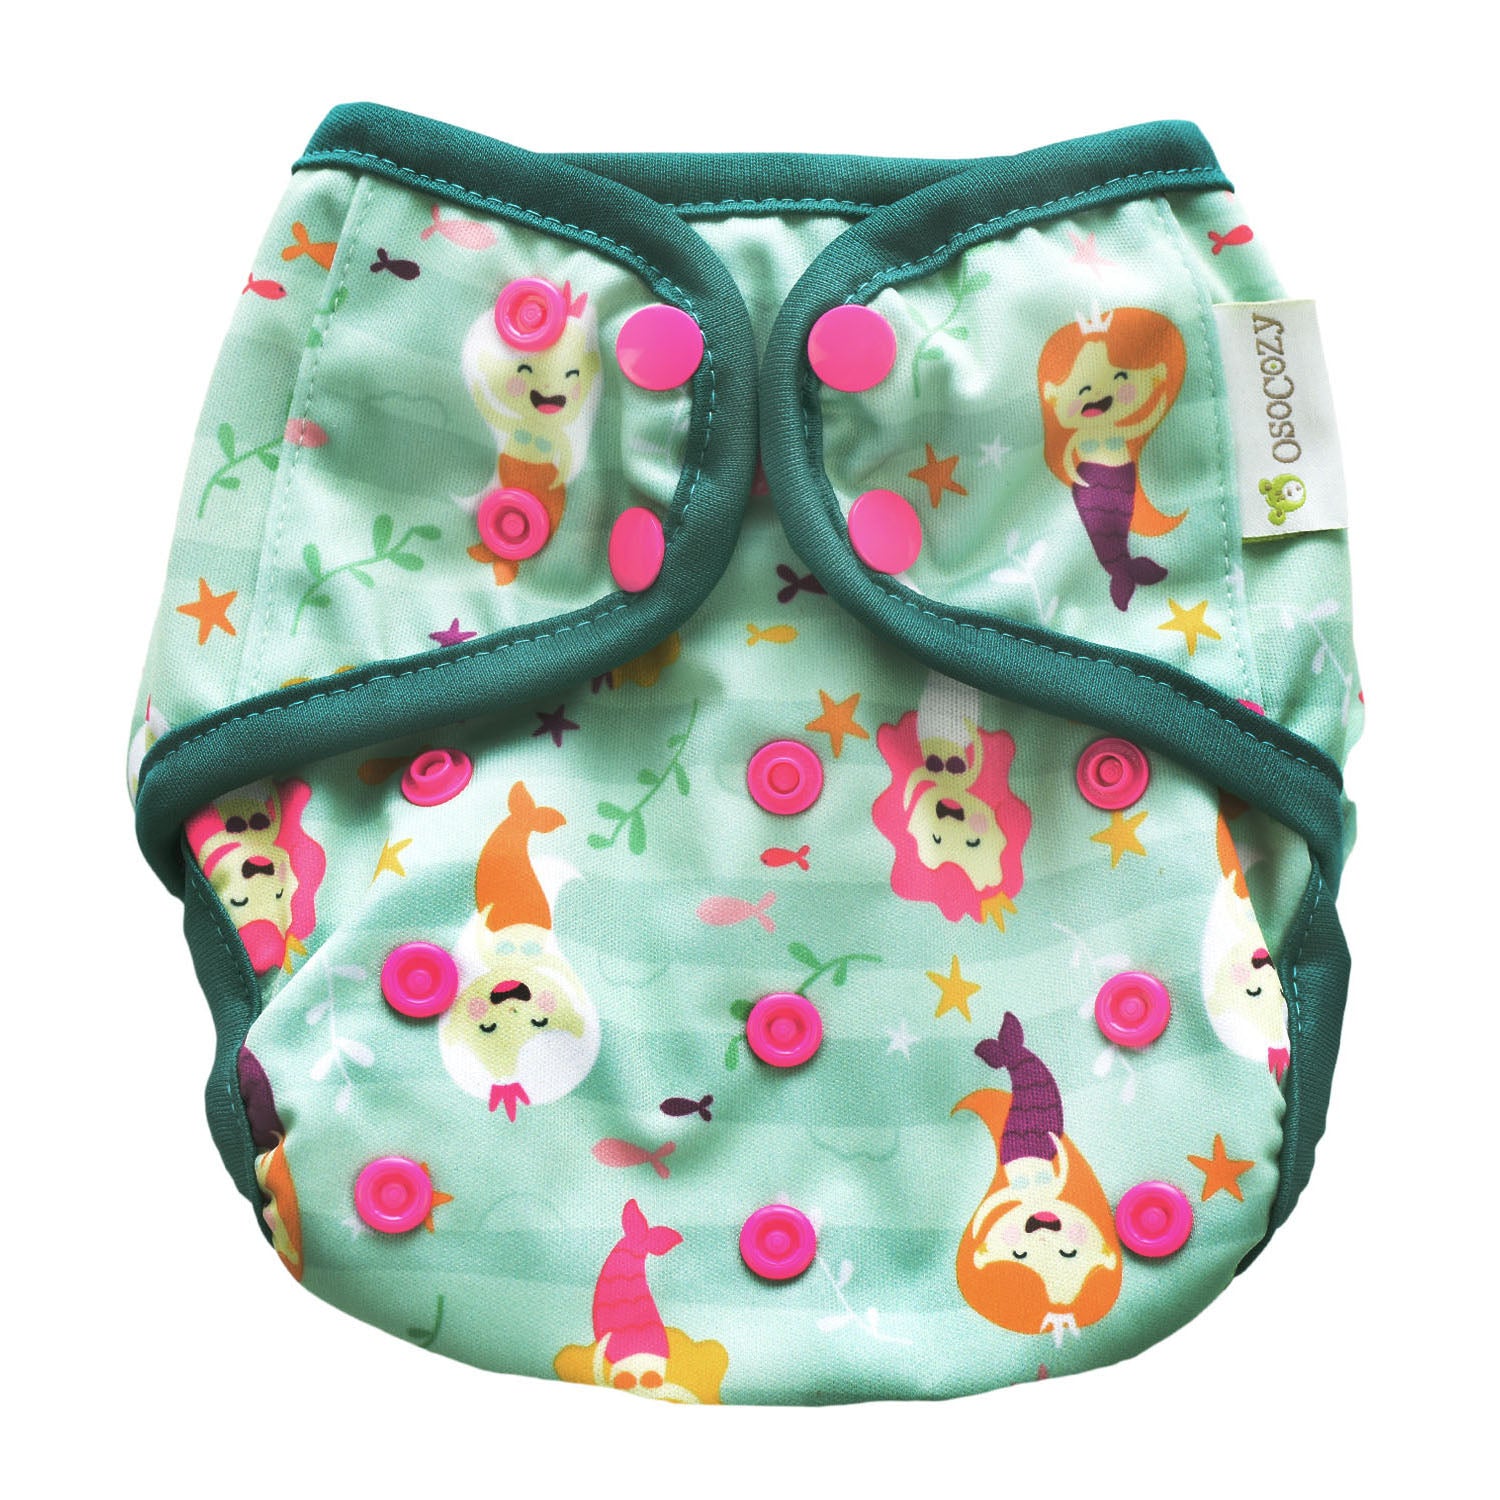 OsoCozy One Size Diaper Covers (8-35 lbs)